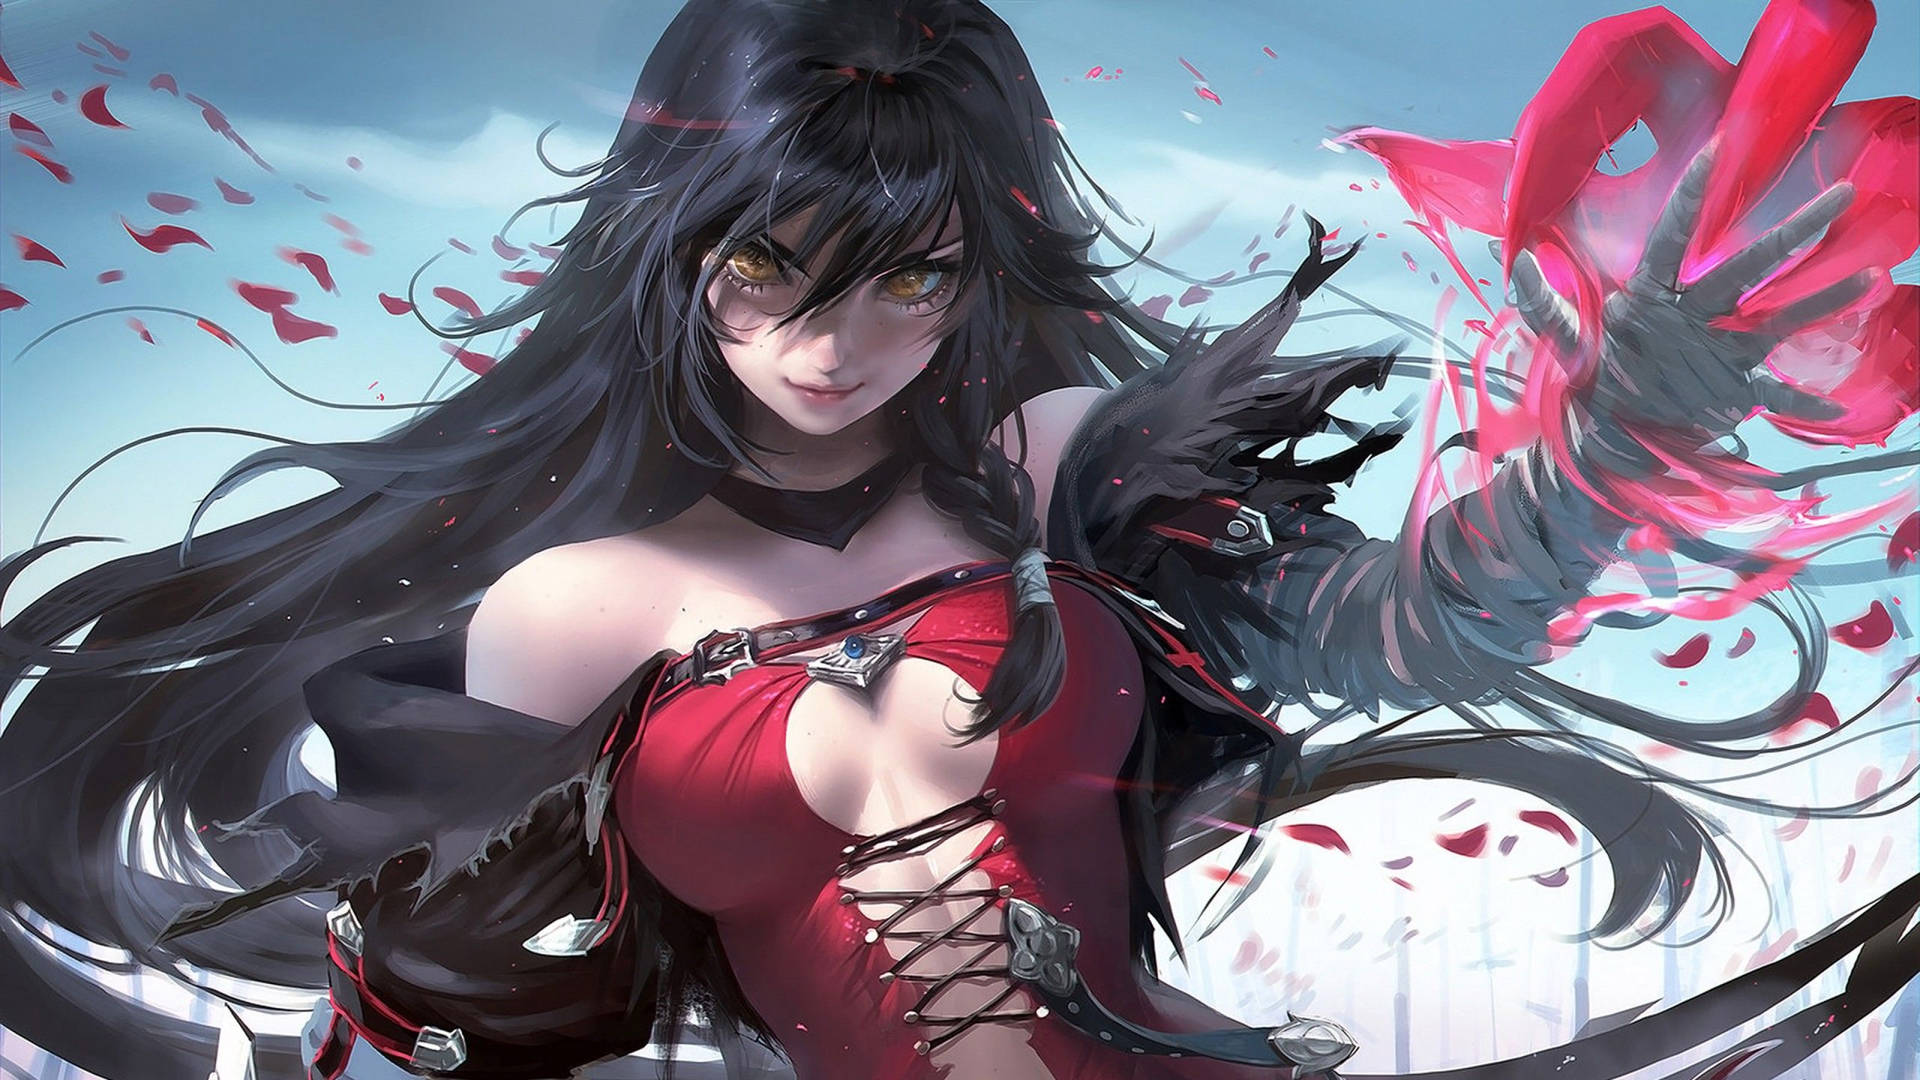 Hot anime girl with long black hair and red claws as hand wallpaper